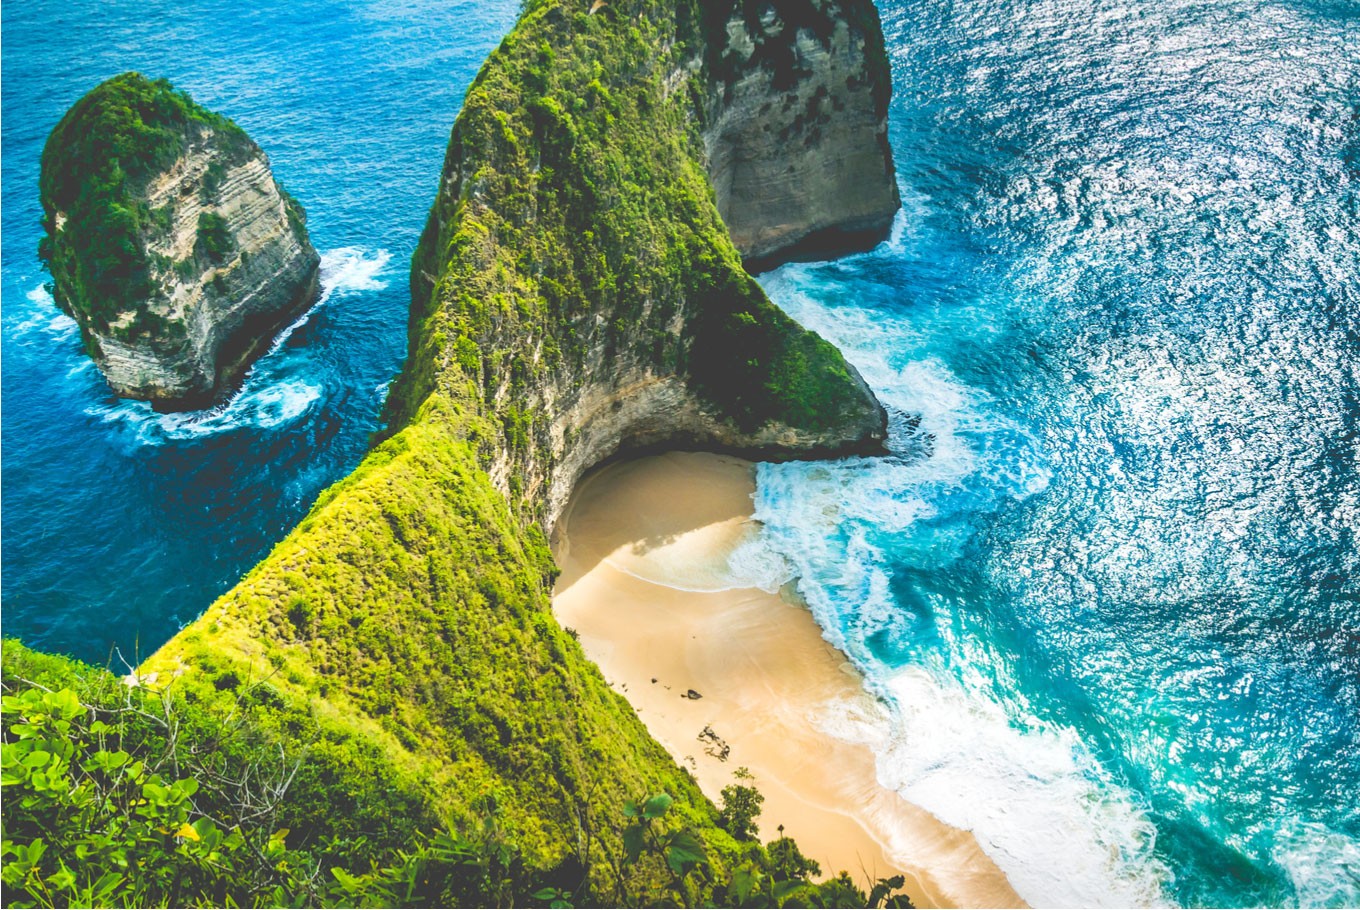 Tips for a budget-friendly trip to Nusa Penida - Tips - The Jakarta Post